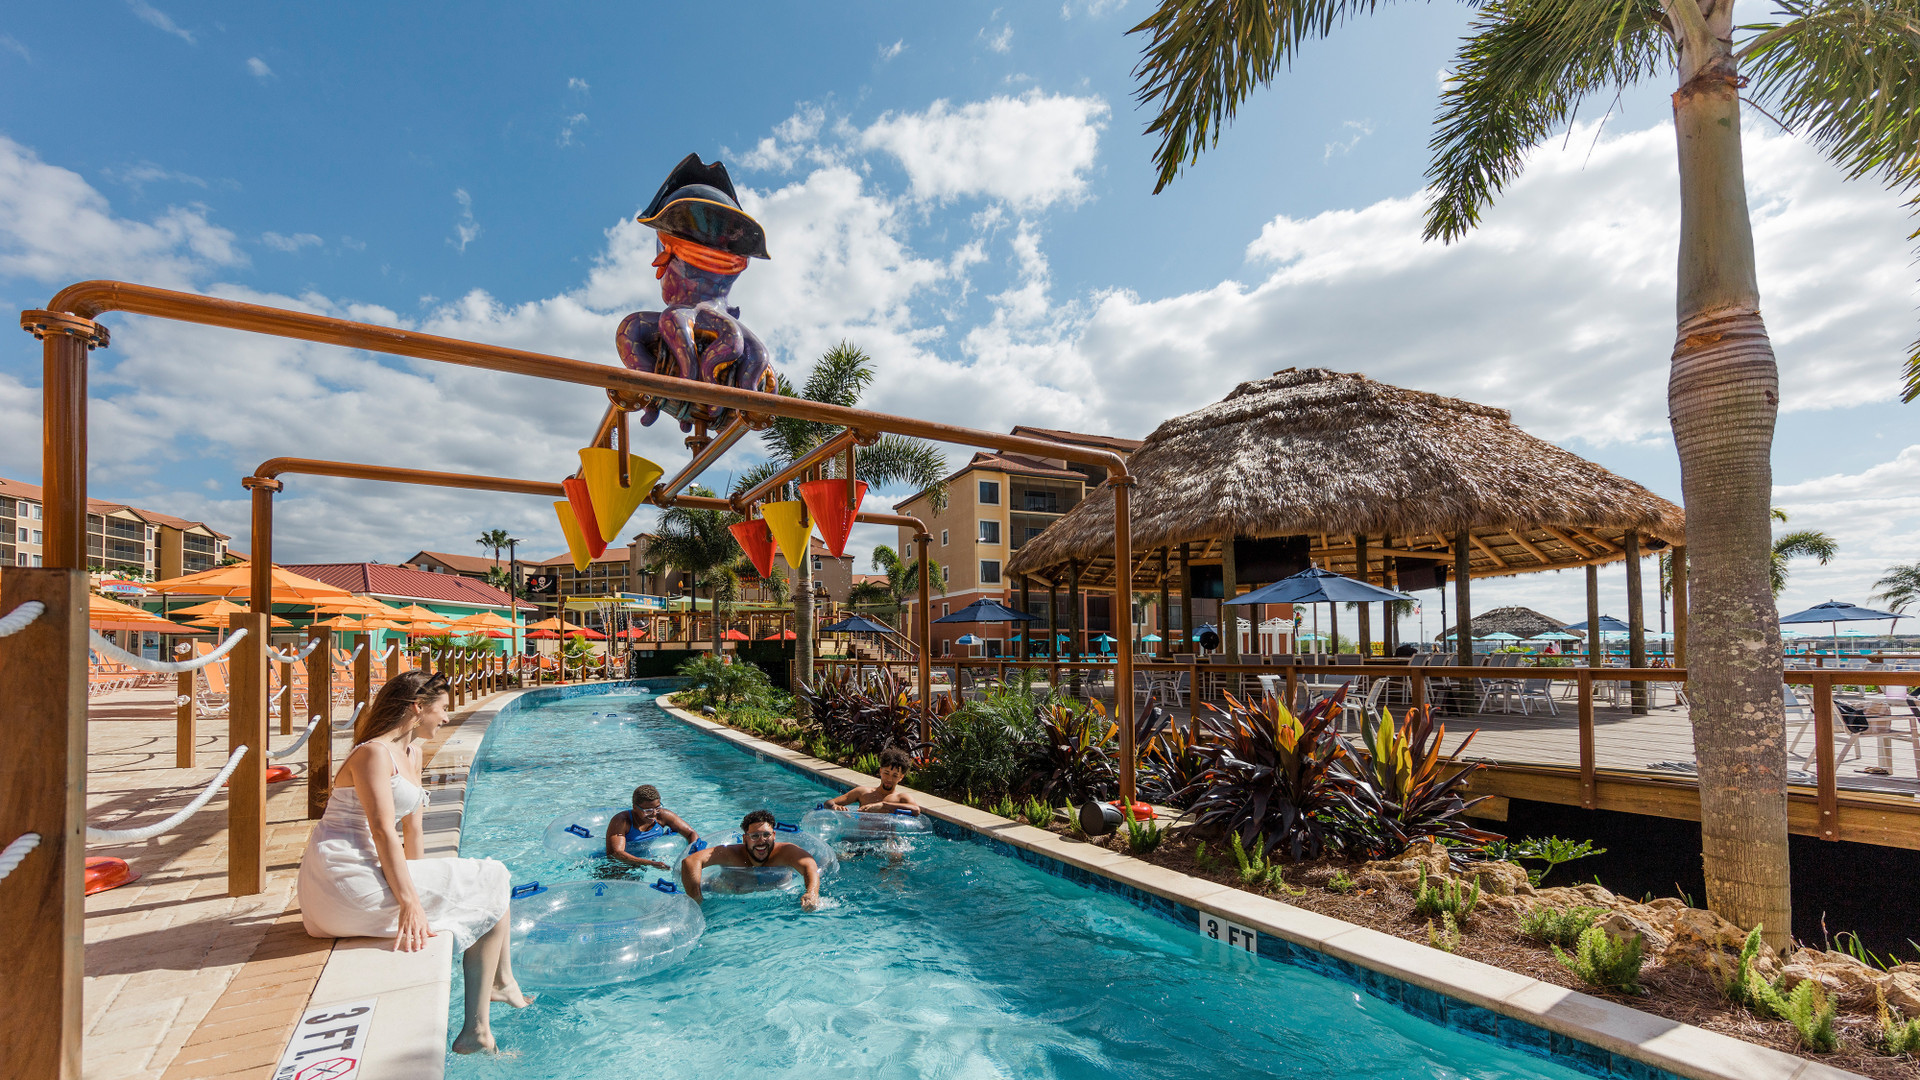 treaure cove water park - two guests floating downt the lazy river - westgate lakes resort & spa